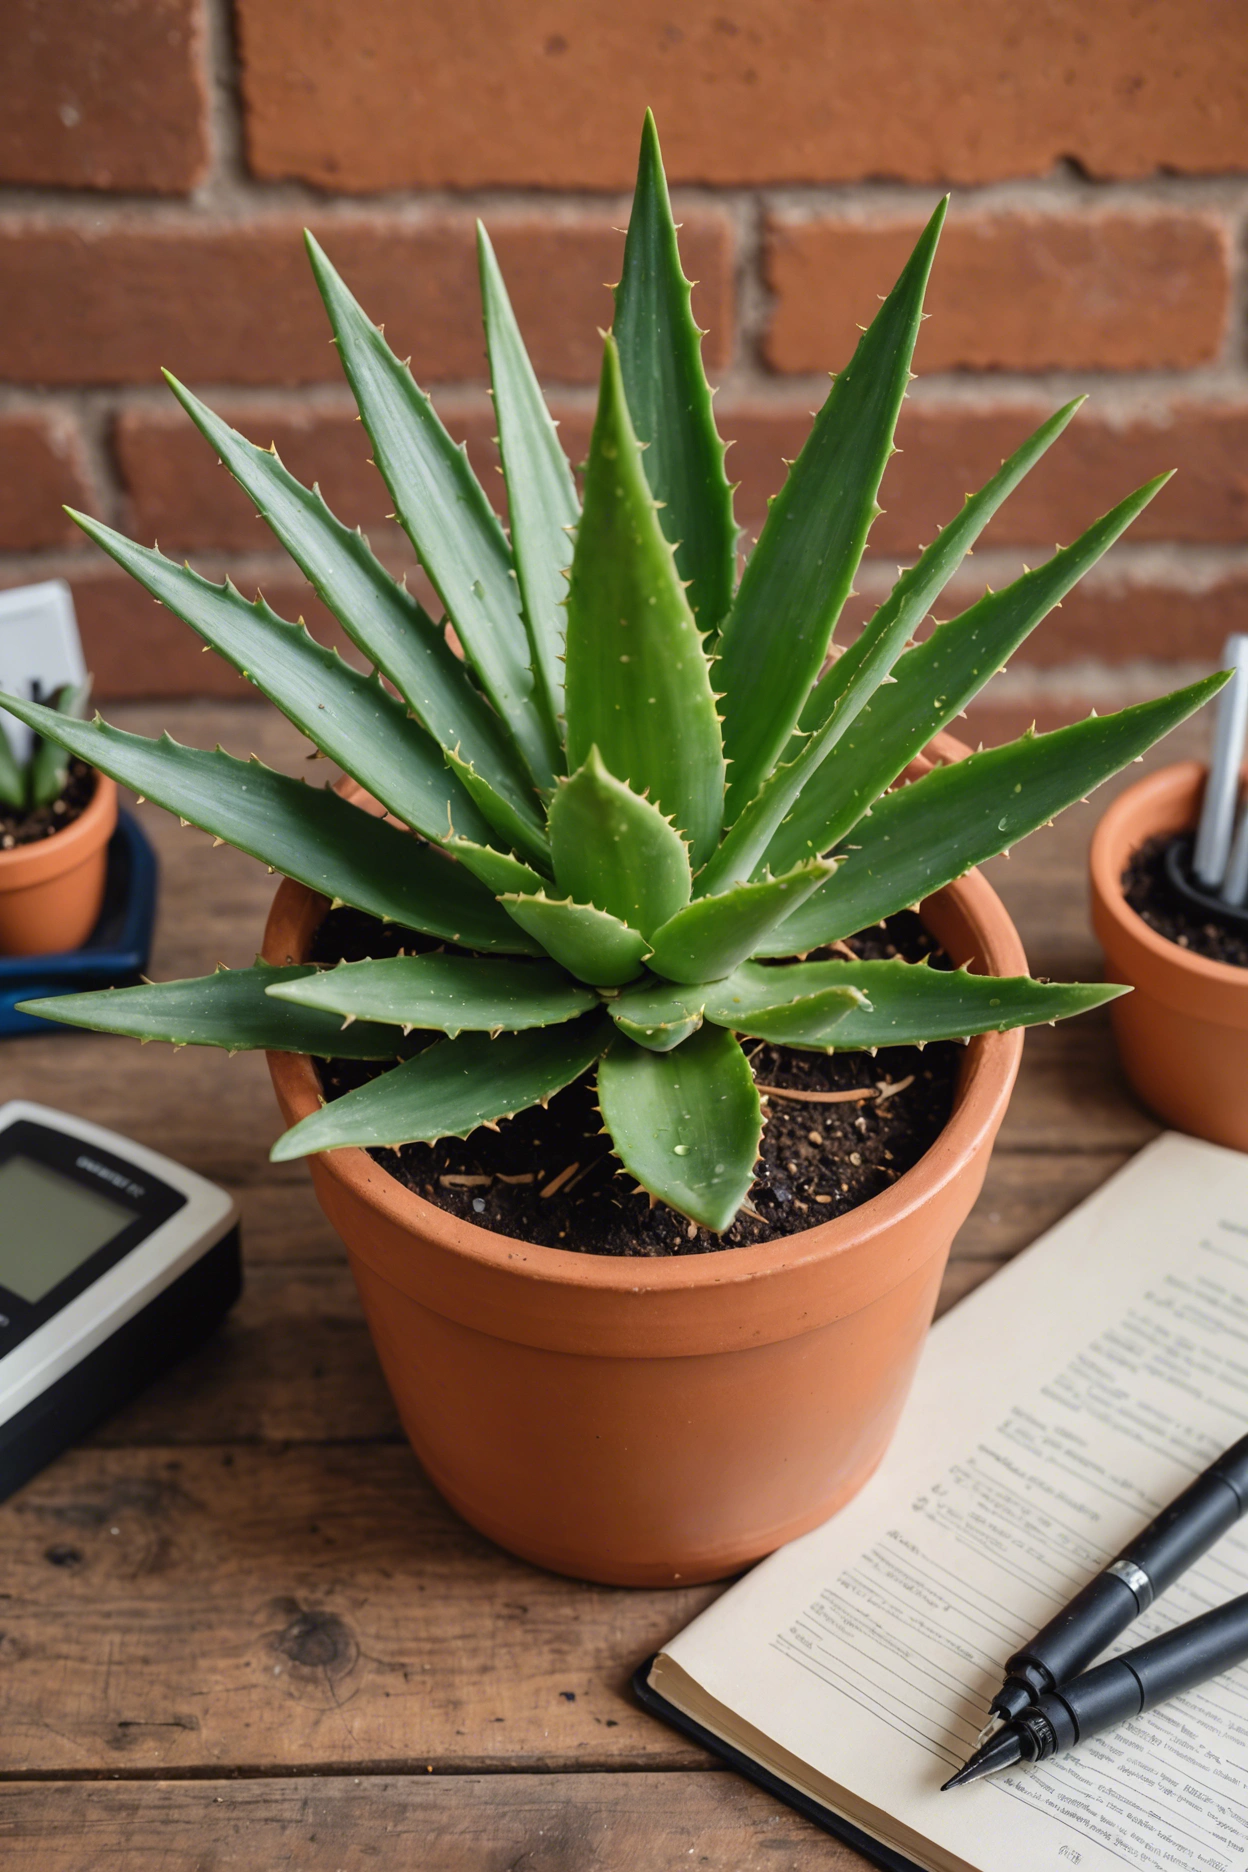 "A distressed aloe vera plant in a terracotta pot, surrounded by diagnostic tools and an open plant guide book."